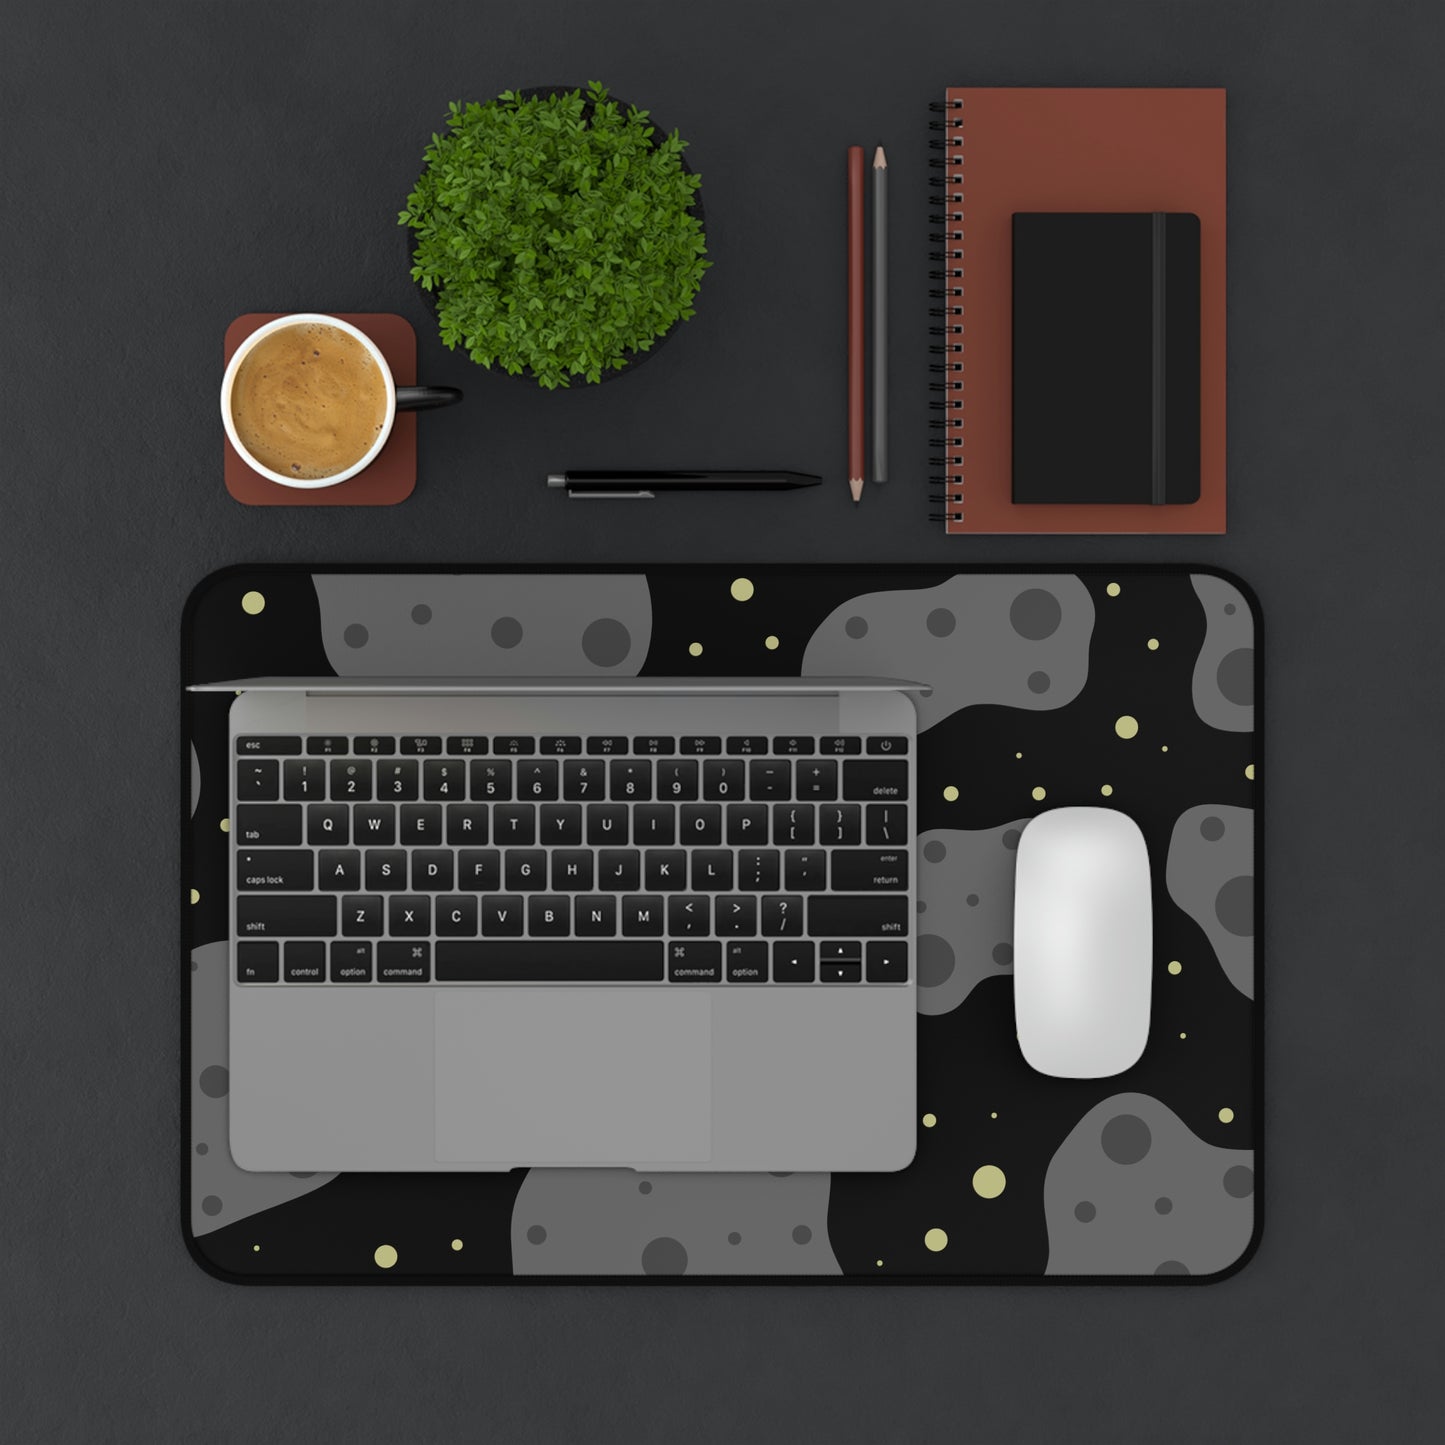 A 12" x 18" desk mat with a black background, gray asteroids, and yellow stars. A laptop and mouse sit on top of it.